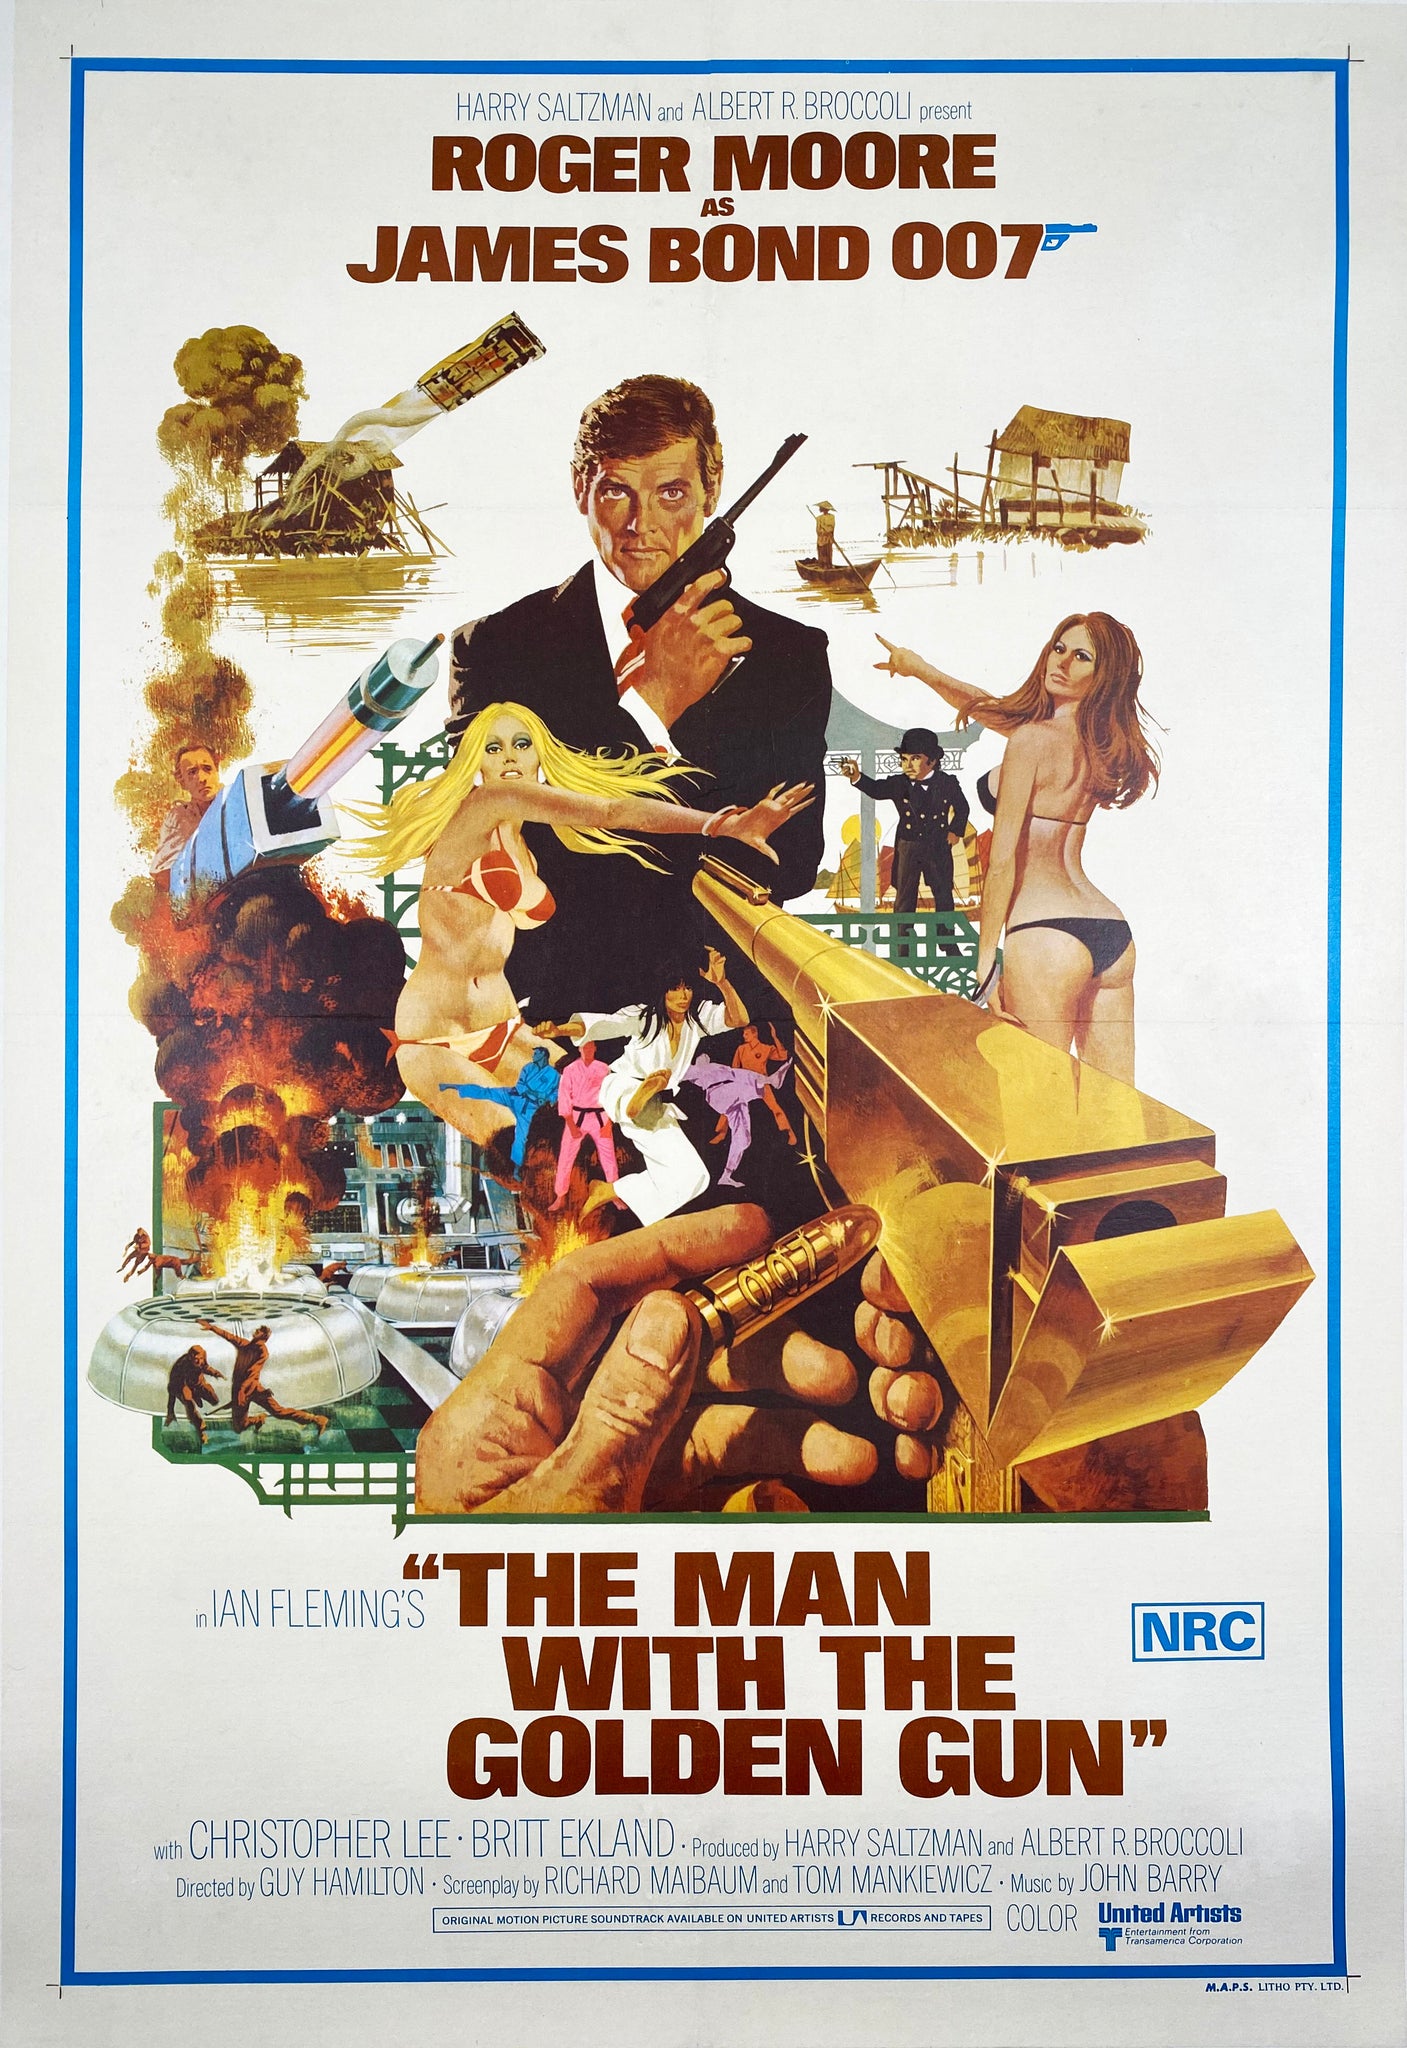 The Man With the Golden Gun - Vintage Film Poster 1974